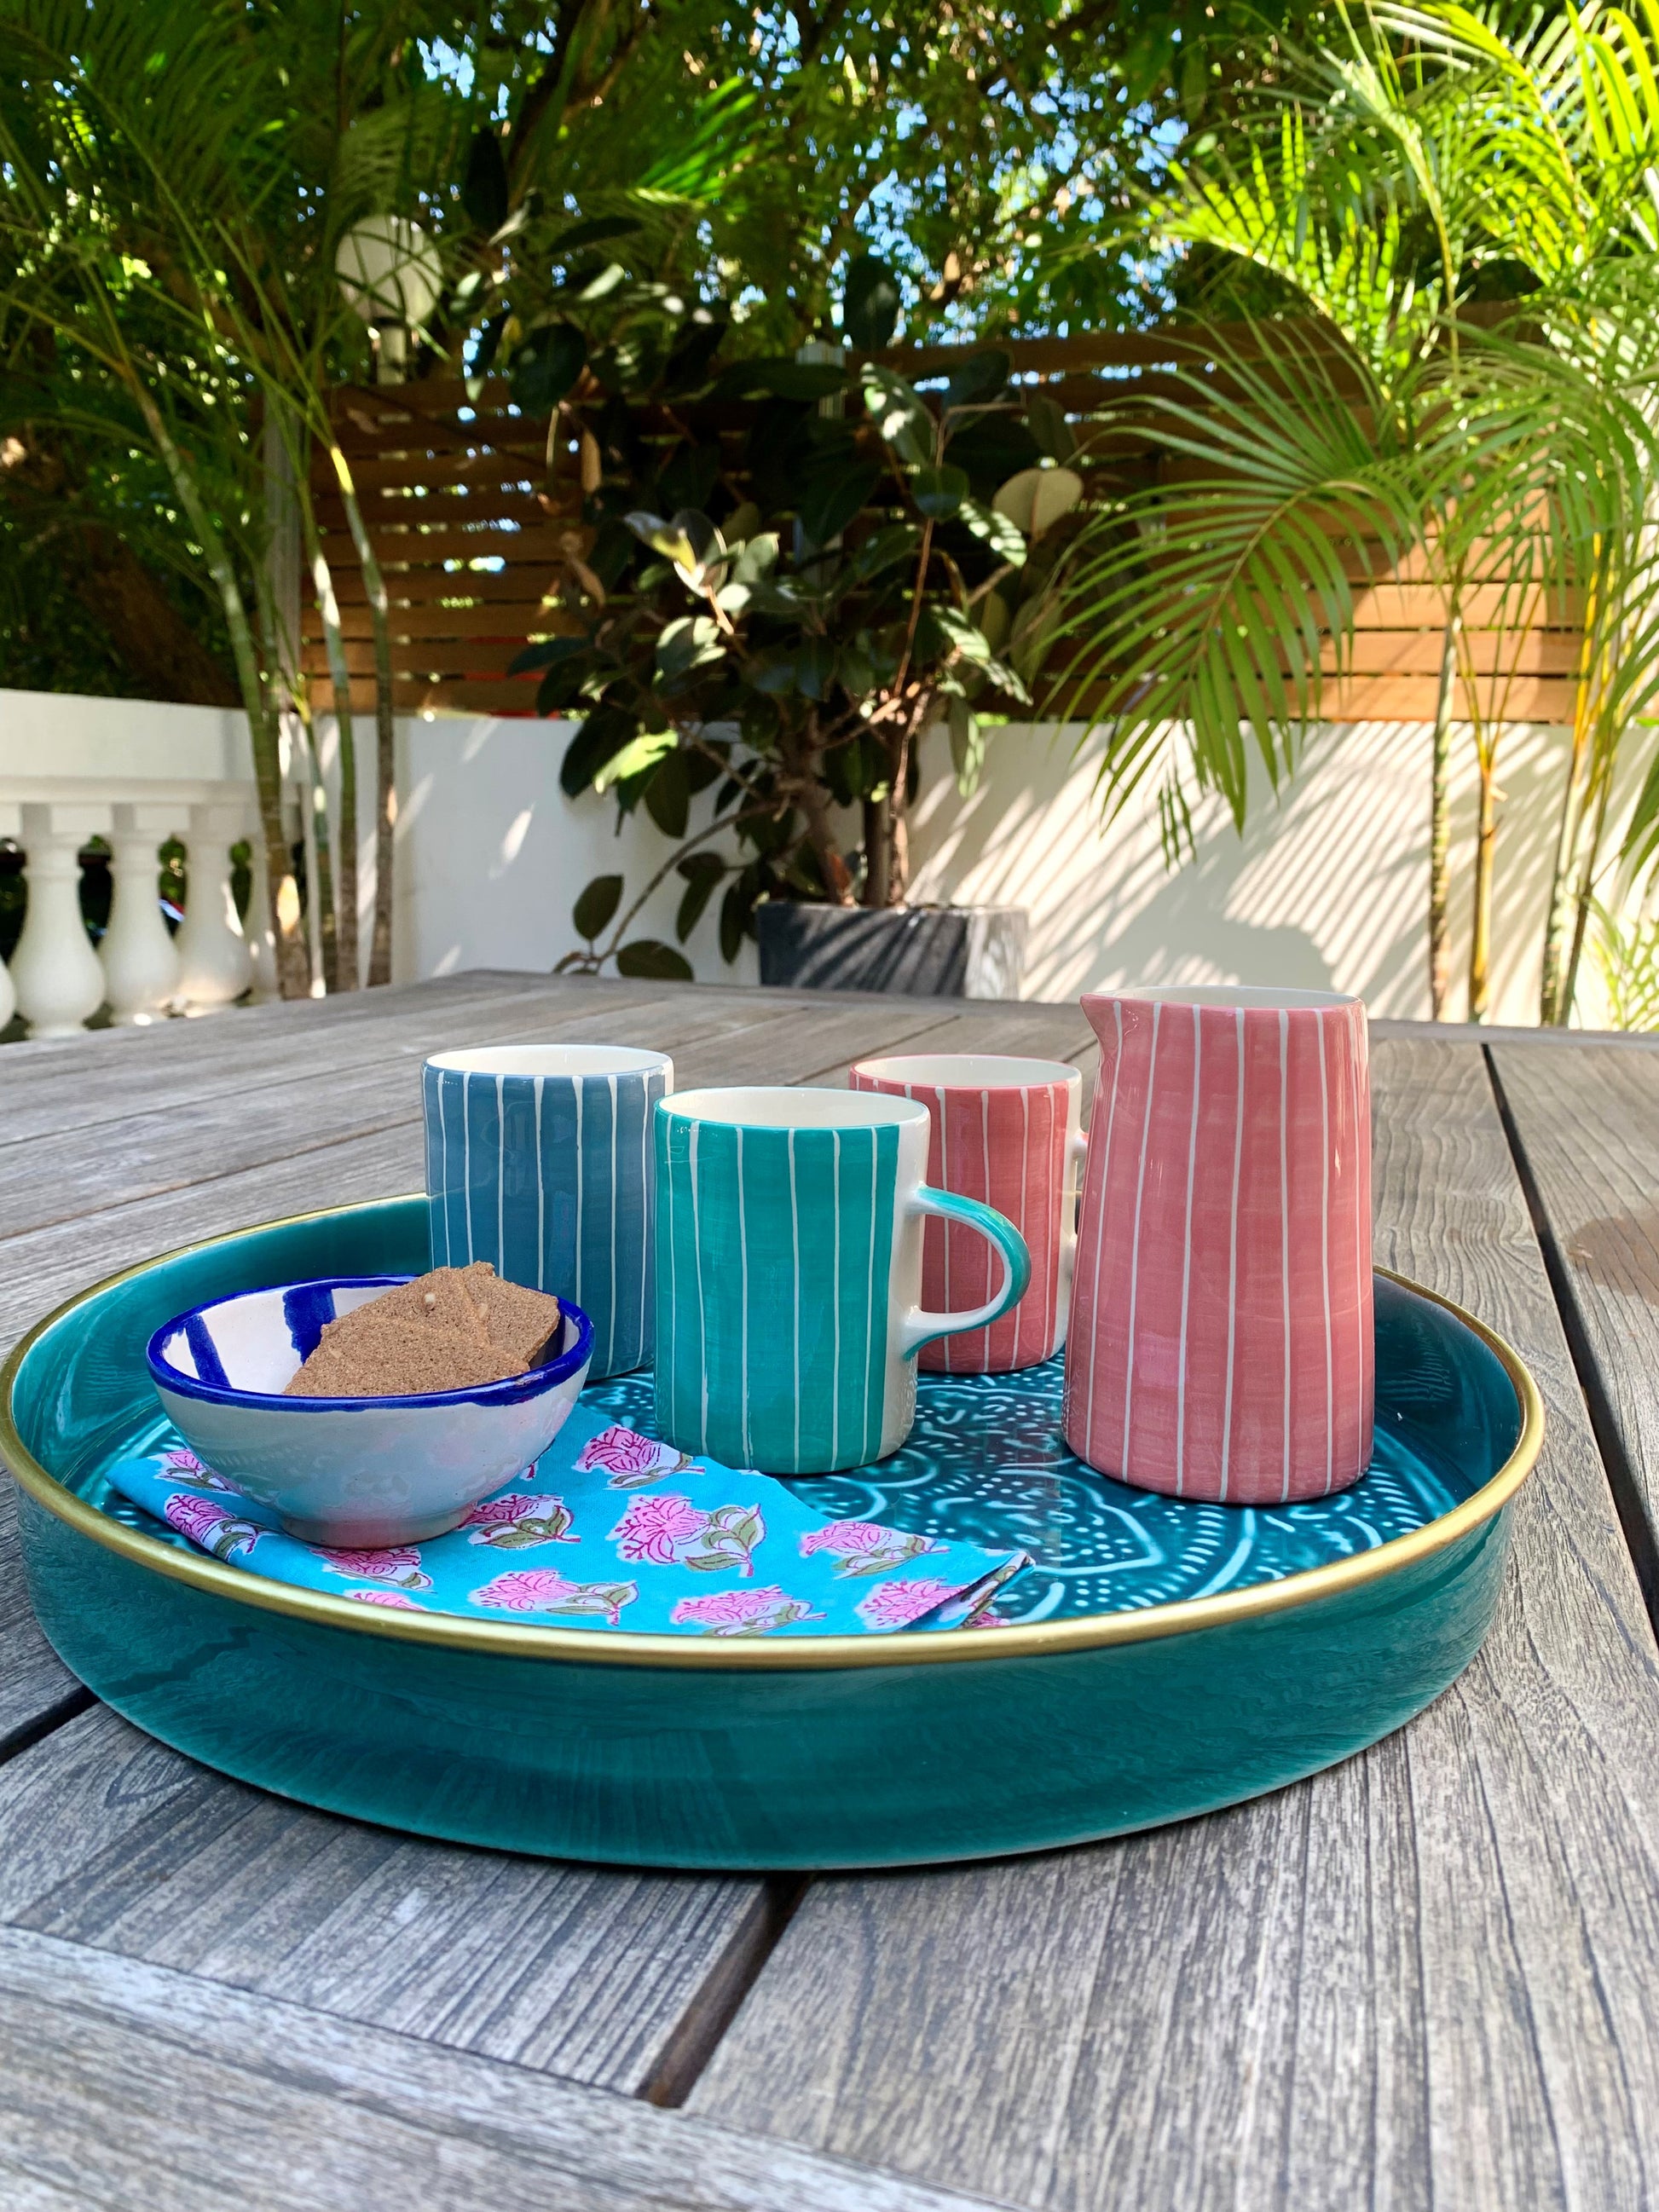 Three hand-painted mugs in grey, pink and mint green on a tray with a milk jug and biscuits.